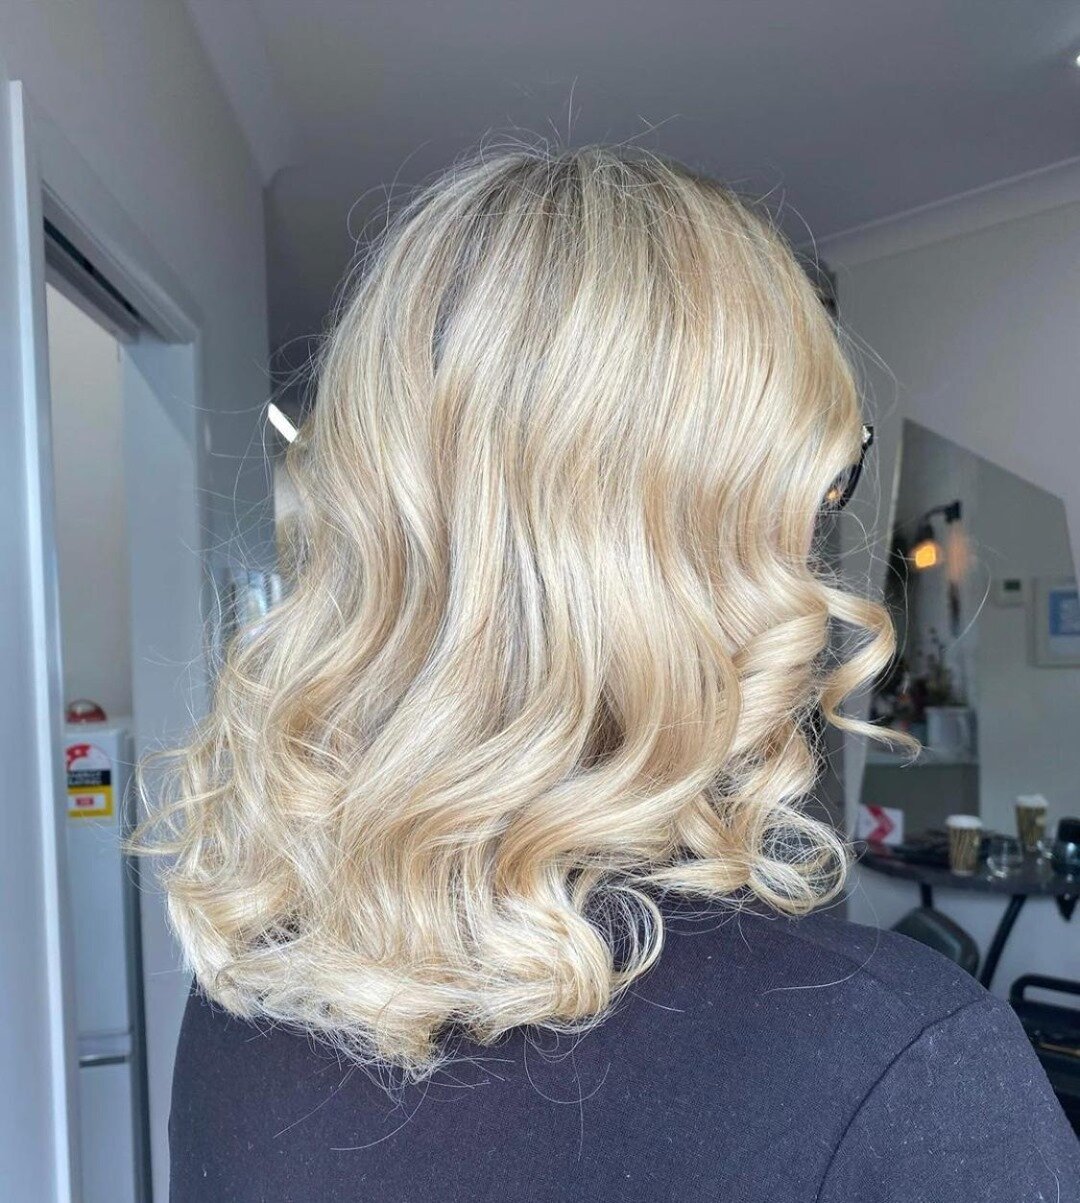 Loving your blonde hair but want to spice things up a little? ⁠
⁠Chat to one of our stylists about how a bright, scandi blonde could revolutionise your look 🙋🏼&zwj;♀️⁠
⁠
Hair by @justineflanagan_hair 💫⁠
⁠
.⁠
.⁠
.⁠
⁠
#AnnandaleHairDesign #Townsvill